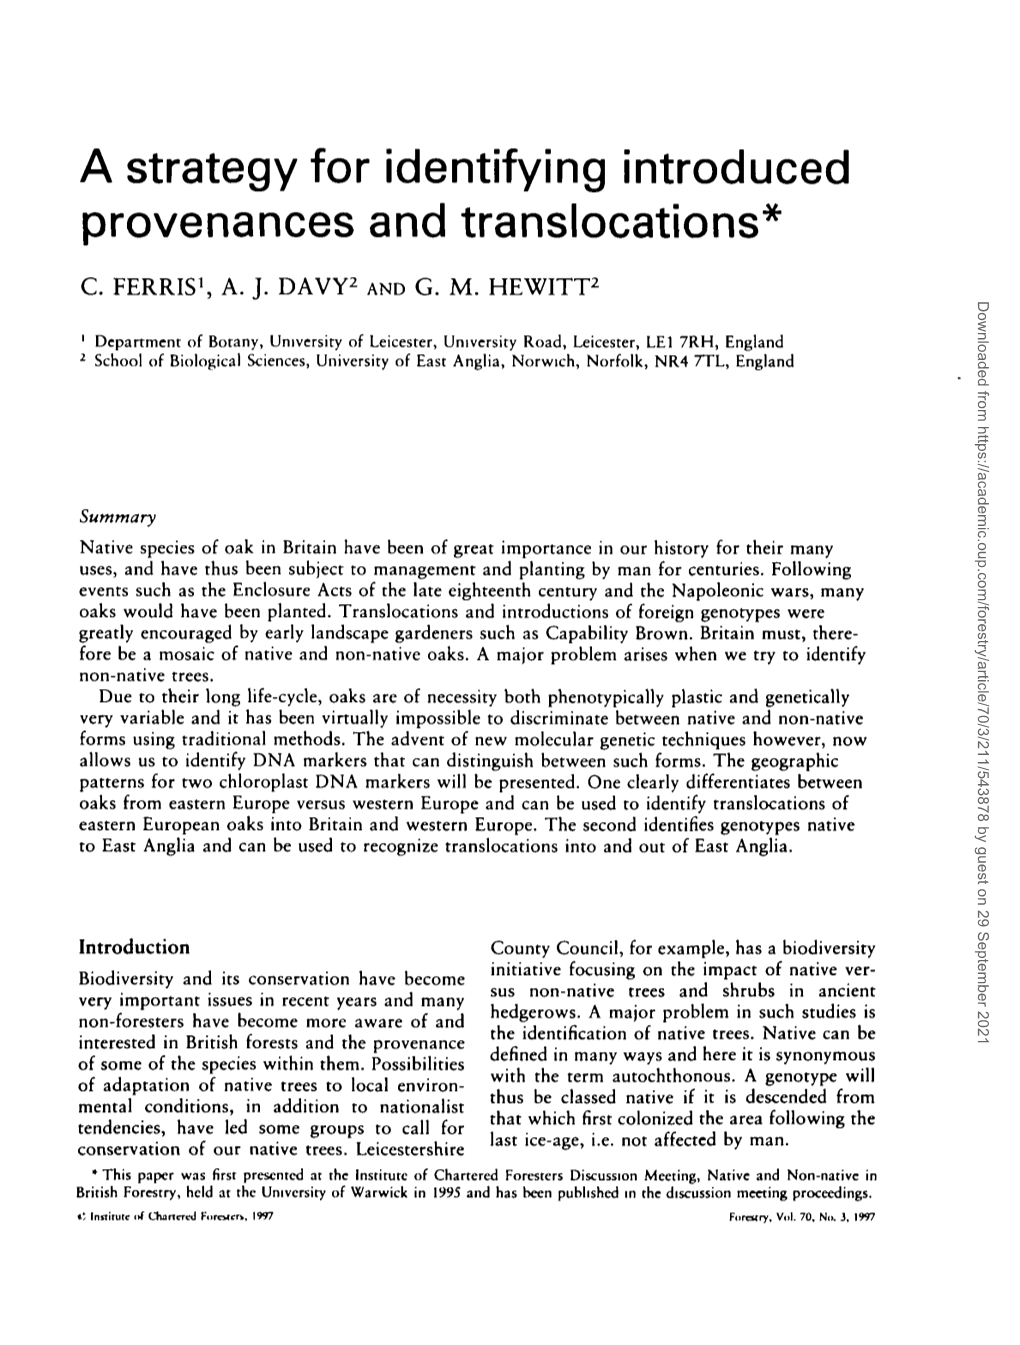 A Strategy for Identifying Introduced Provenances and Translocations*